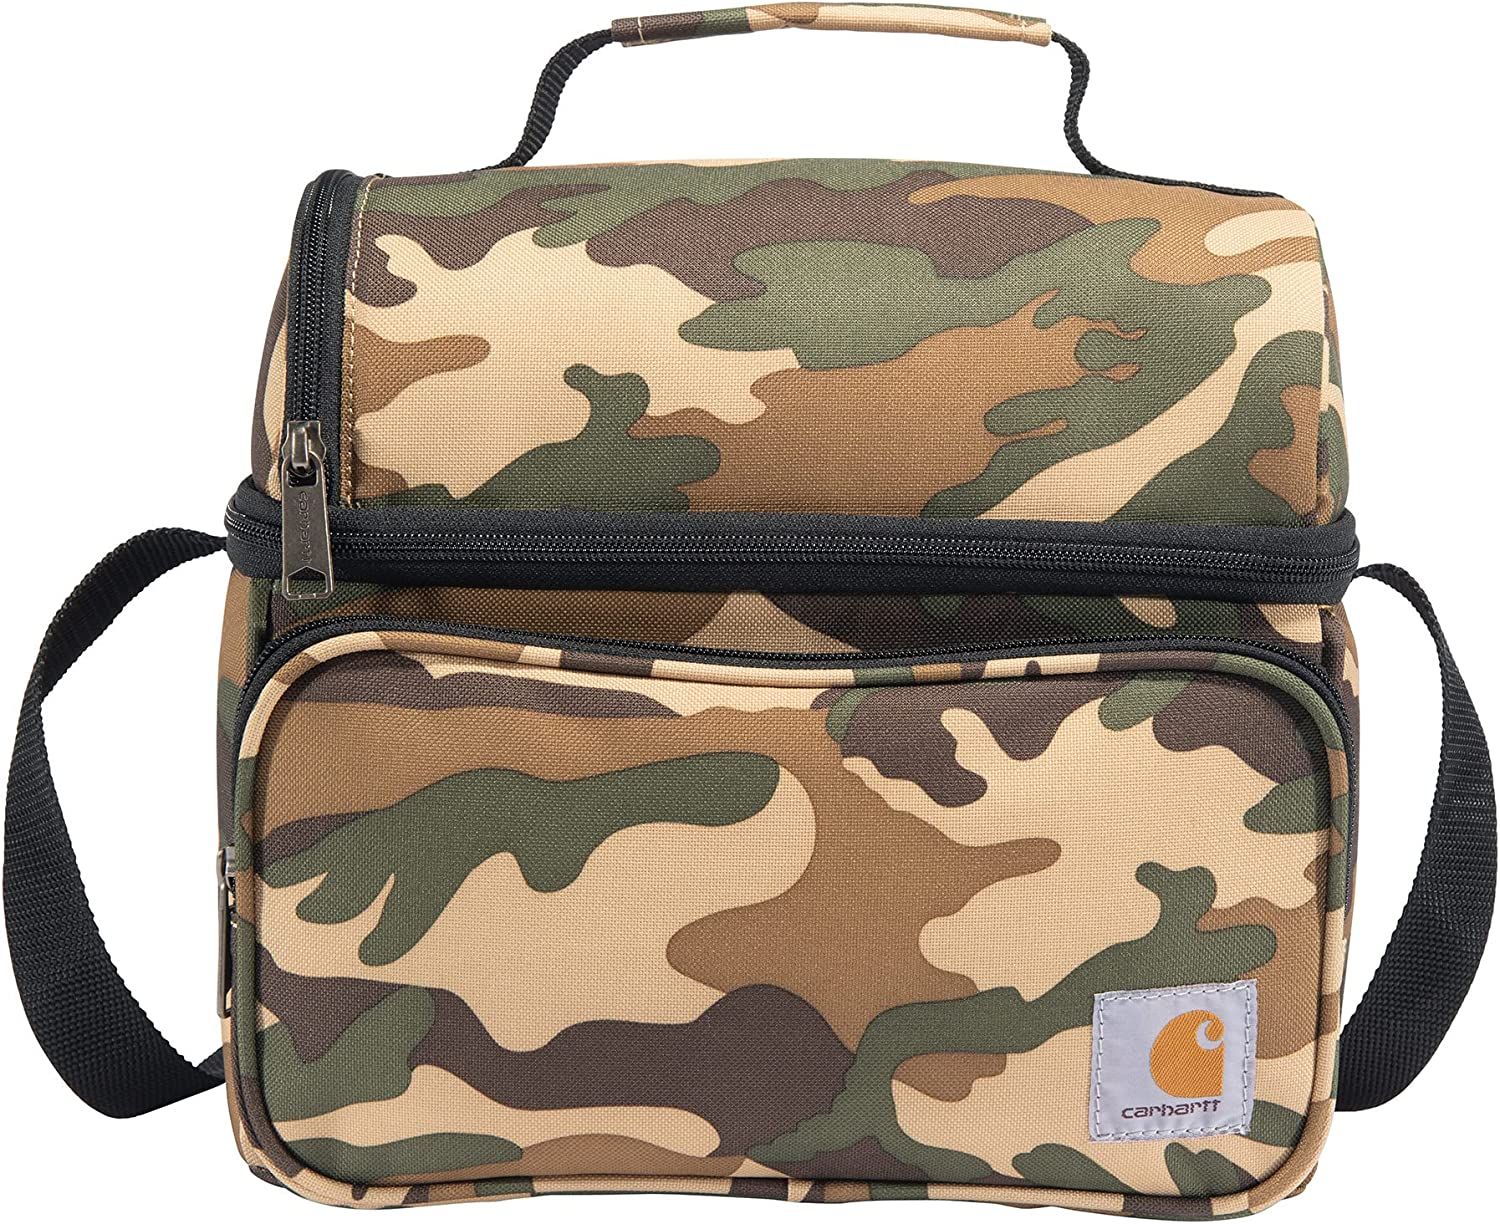 Carhartt Deluxe Dual Compartment Insulated Lunch Cooler Bag, Camo | Amazon (US)